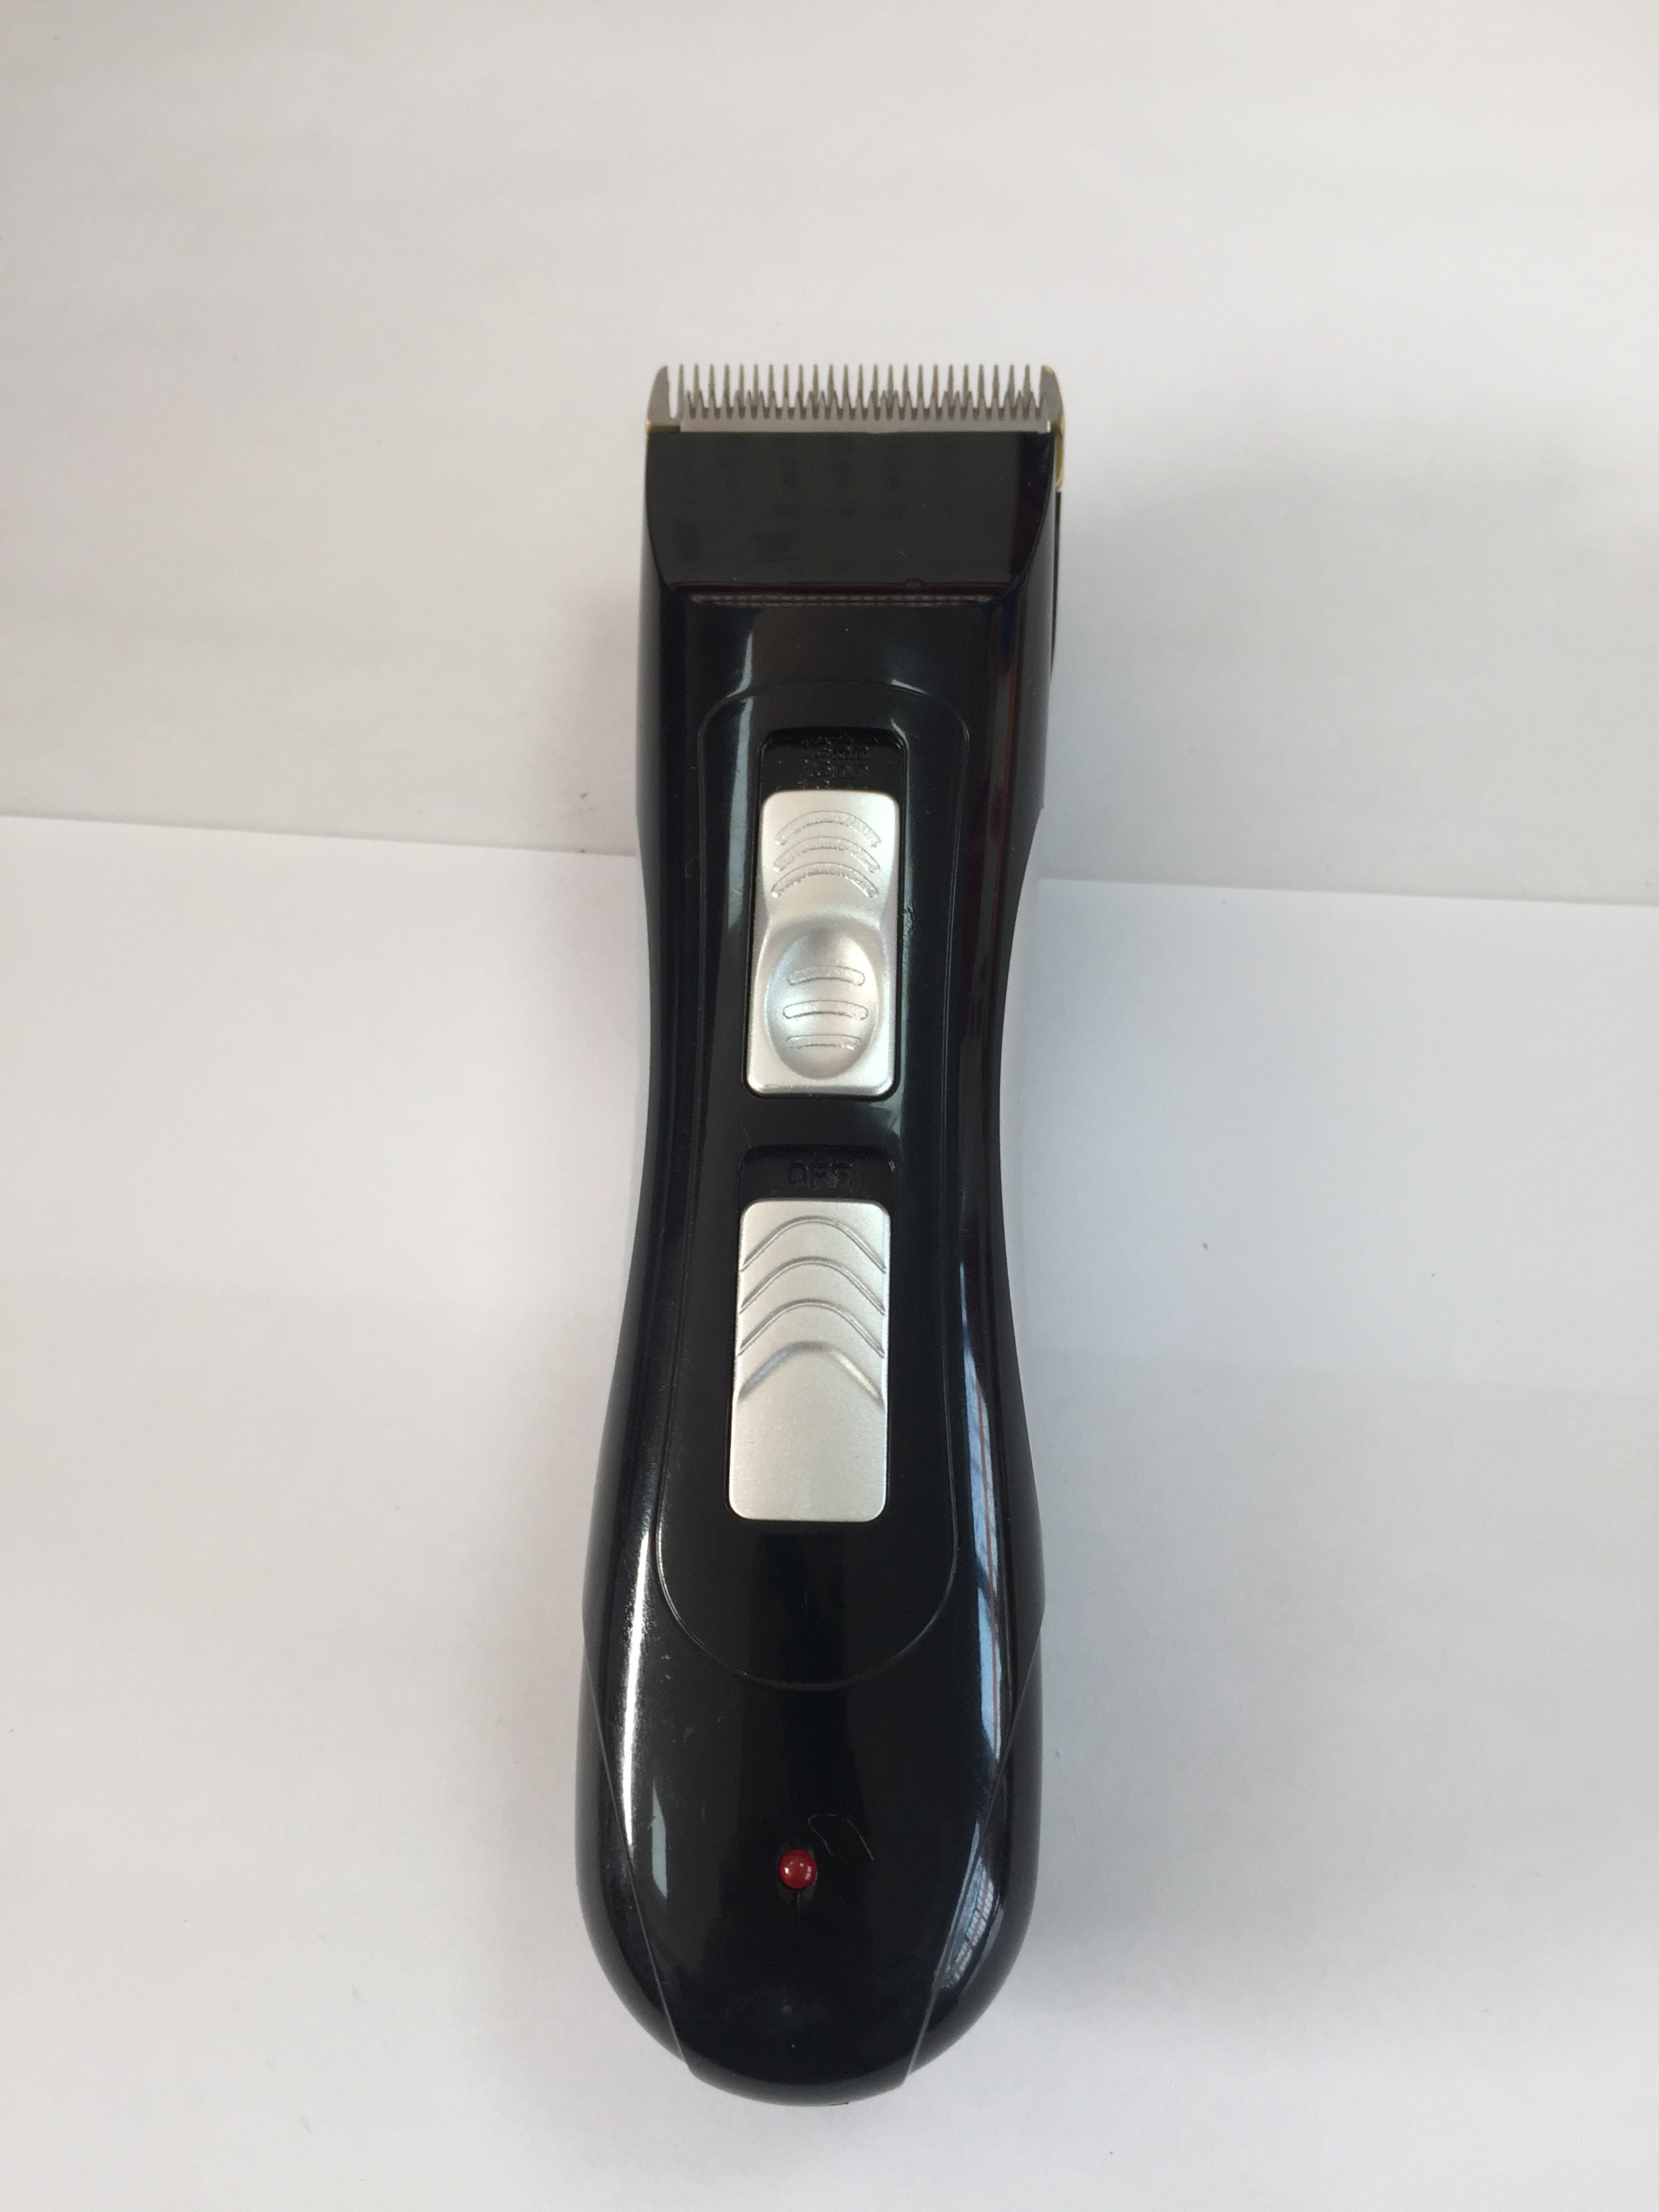 Sharper Stronger And More Durable Male Hair Trimmer Clipper Patented Adjustable For Blade